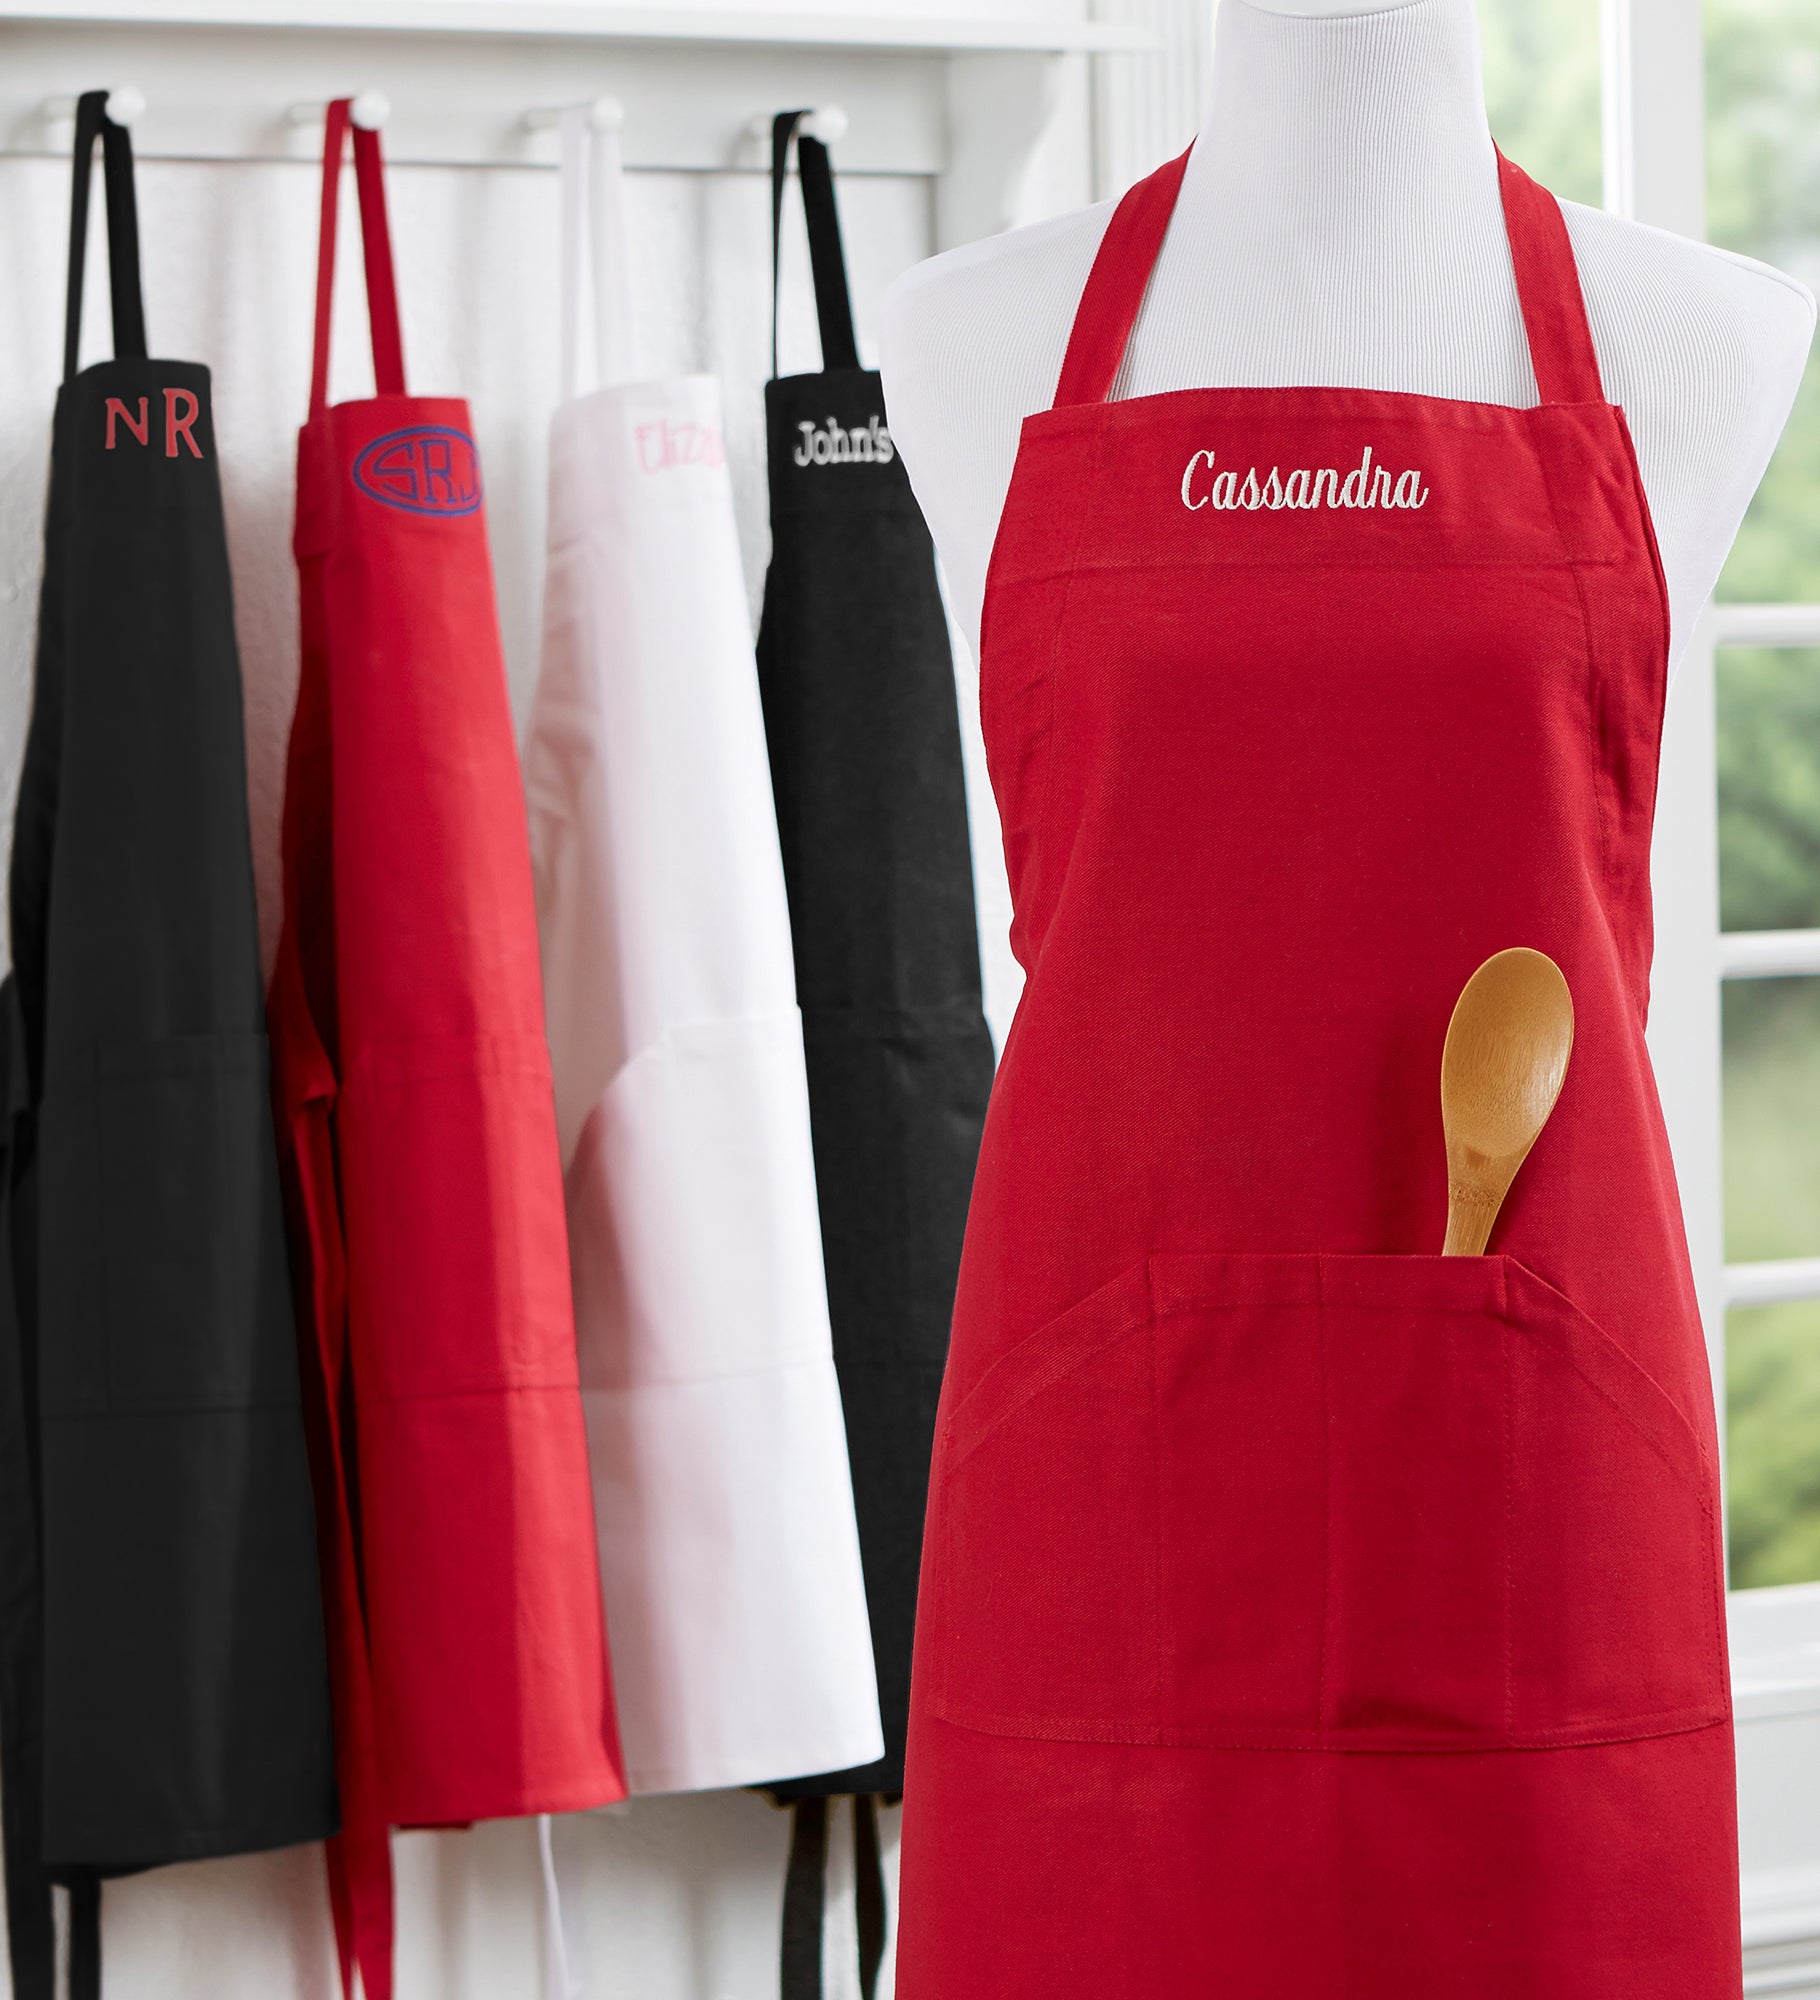 Embroidered Kitchen Apron